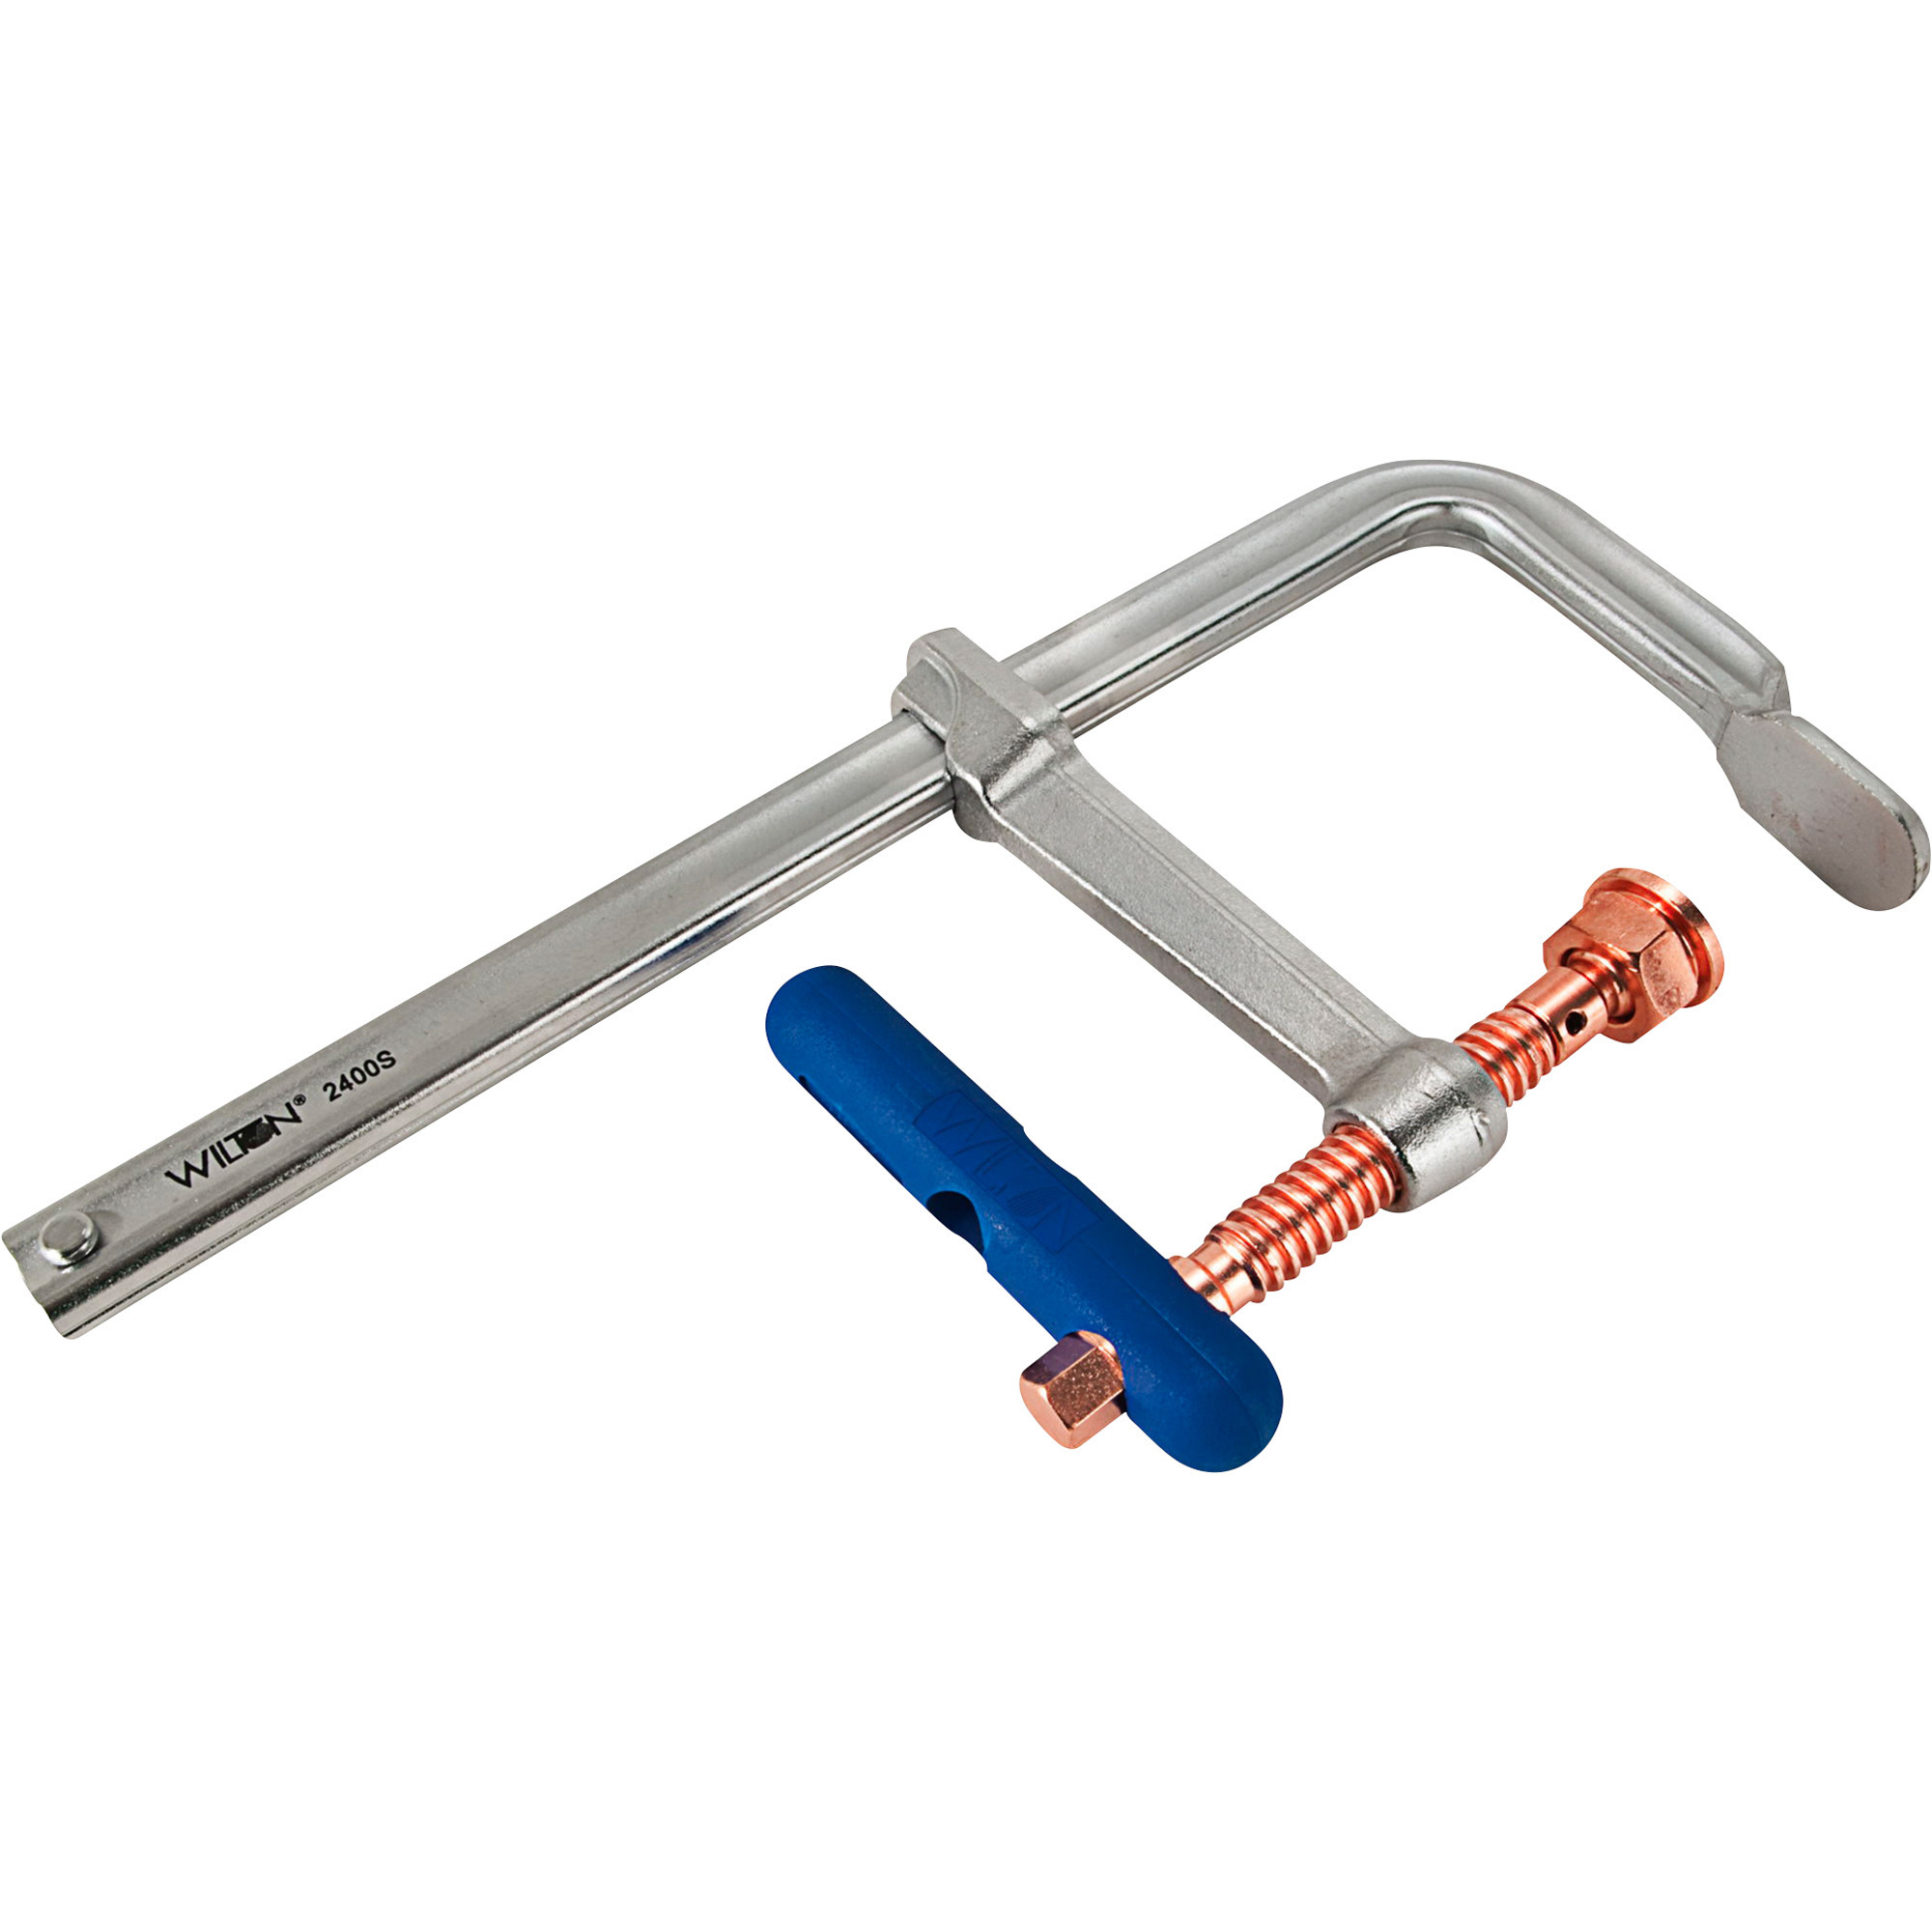 Wilton Spark-Duty Regular-Duty F-Clamp, 24Inch, Copper-Plated Spindle, Model 2400S-24C